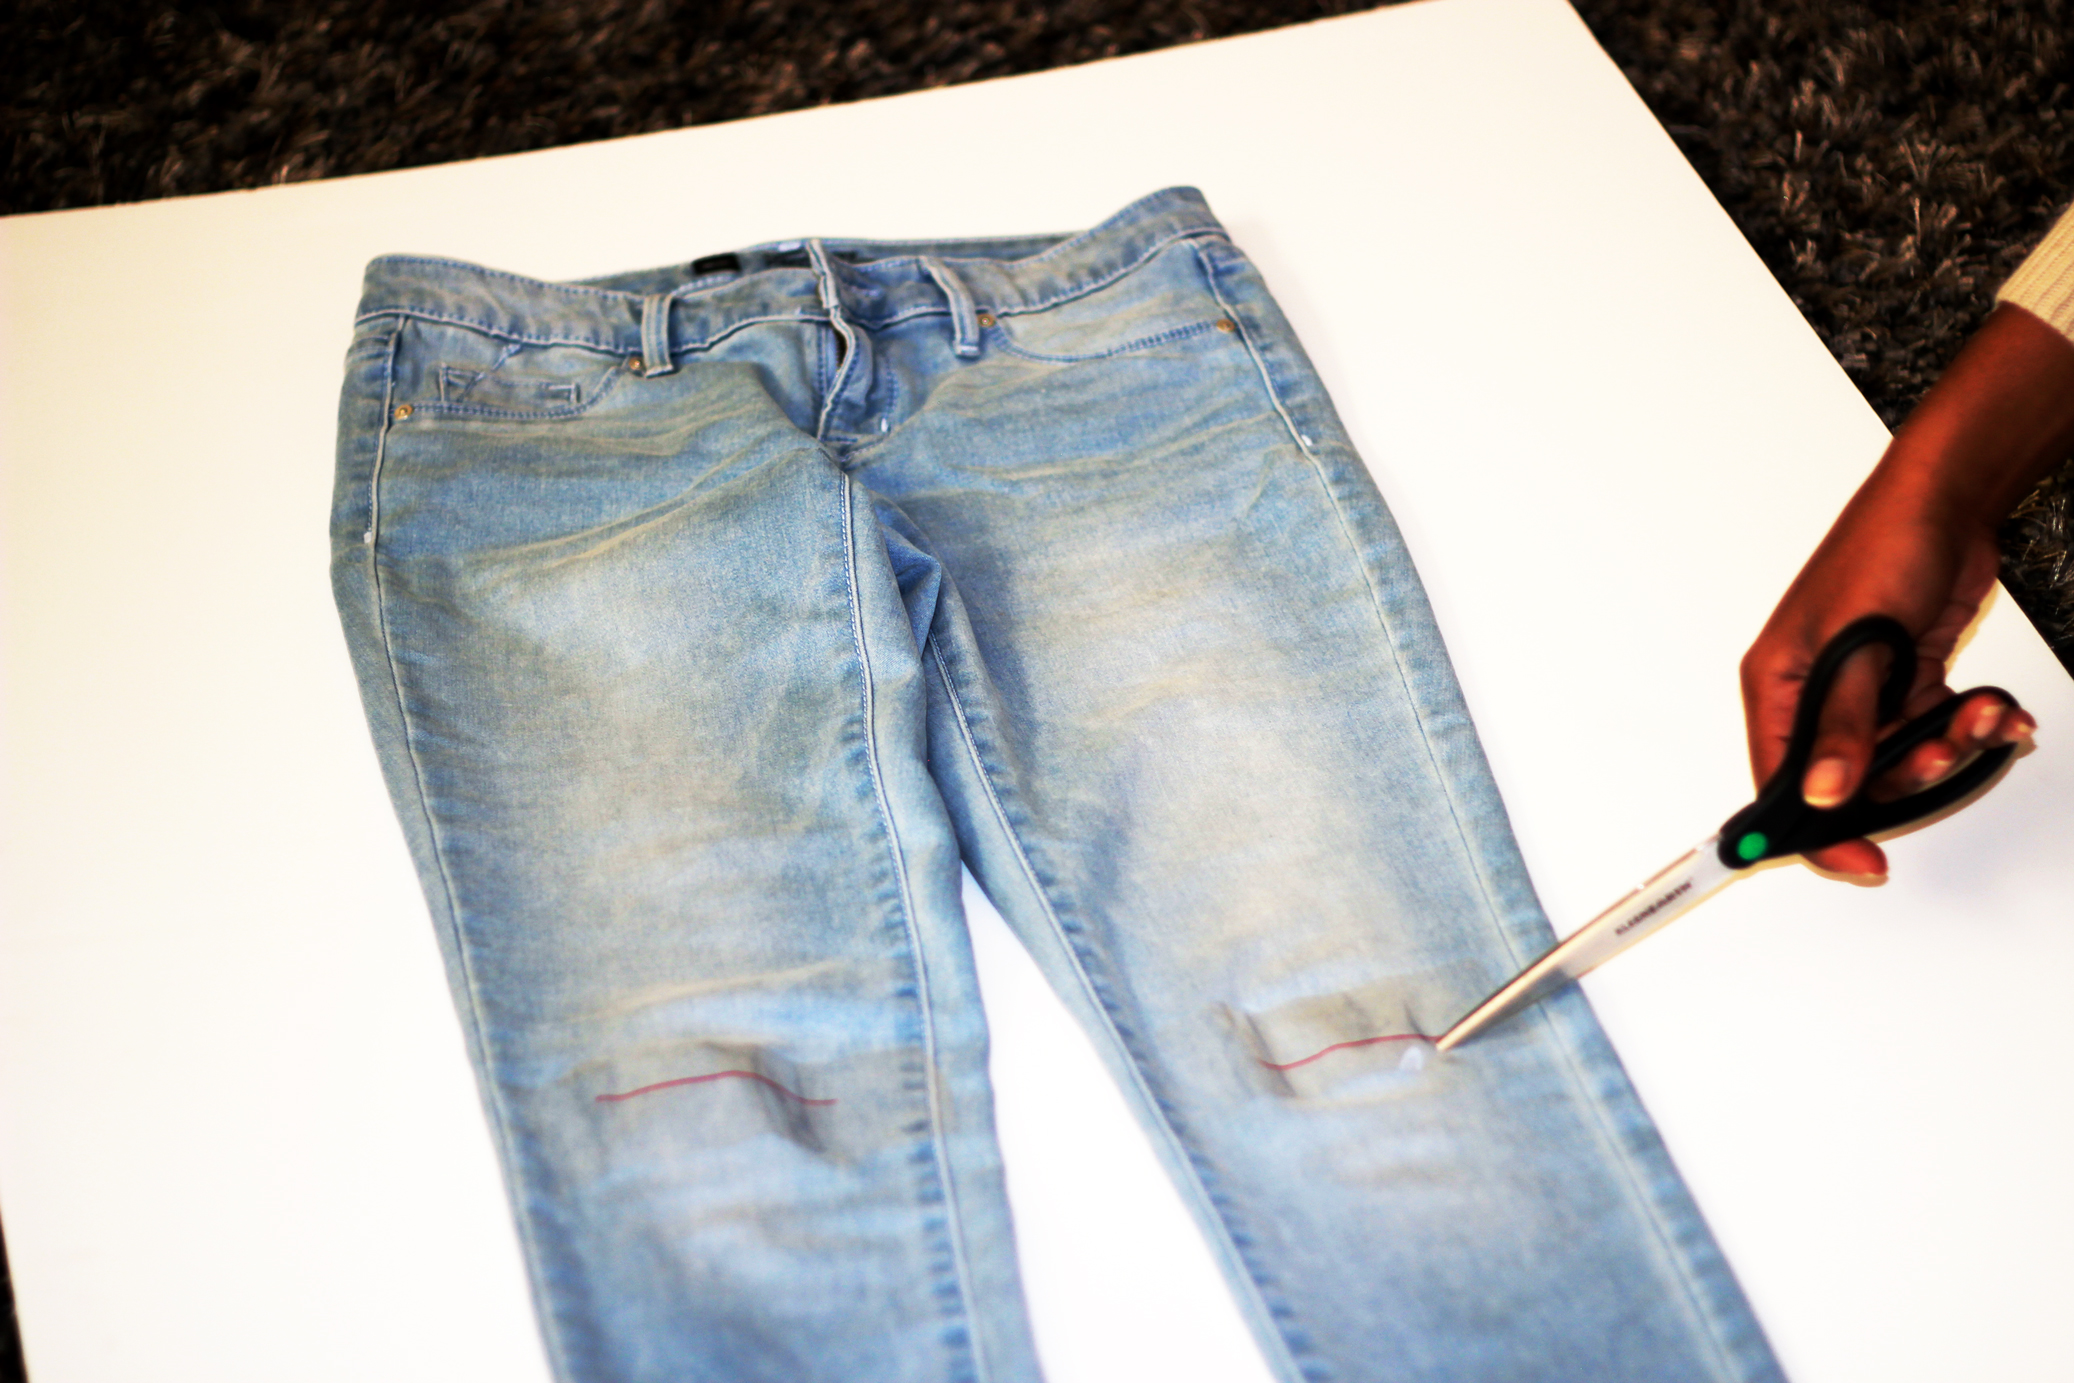 How to Make Ripped Jeans in 5 Steps